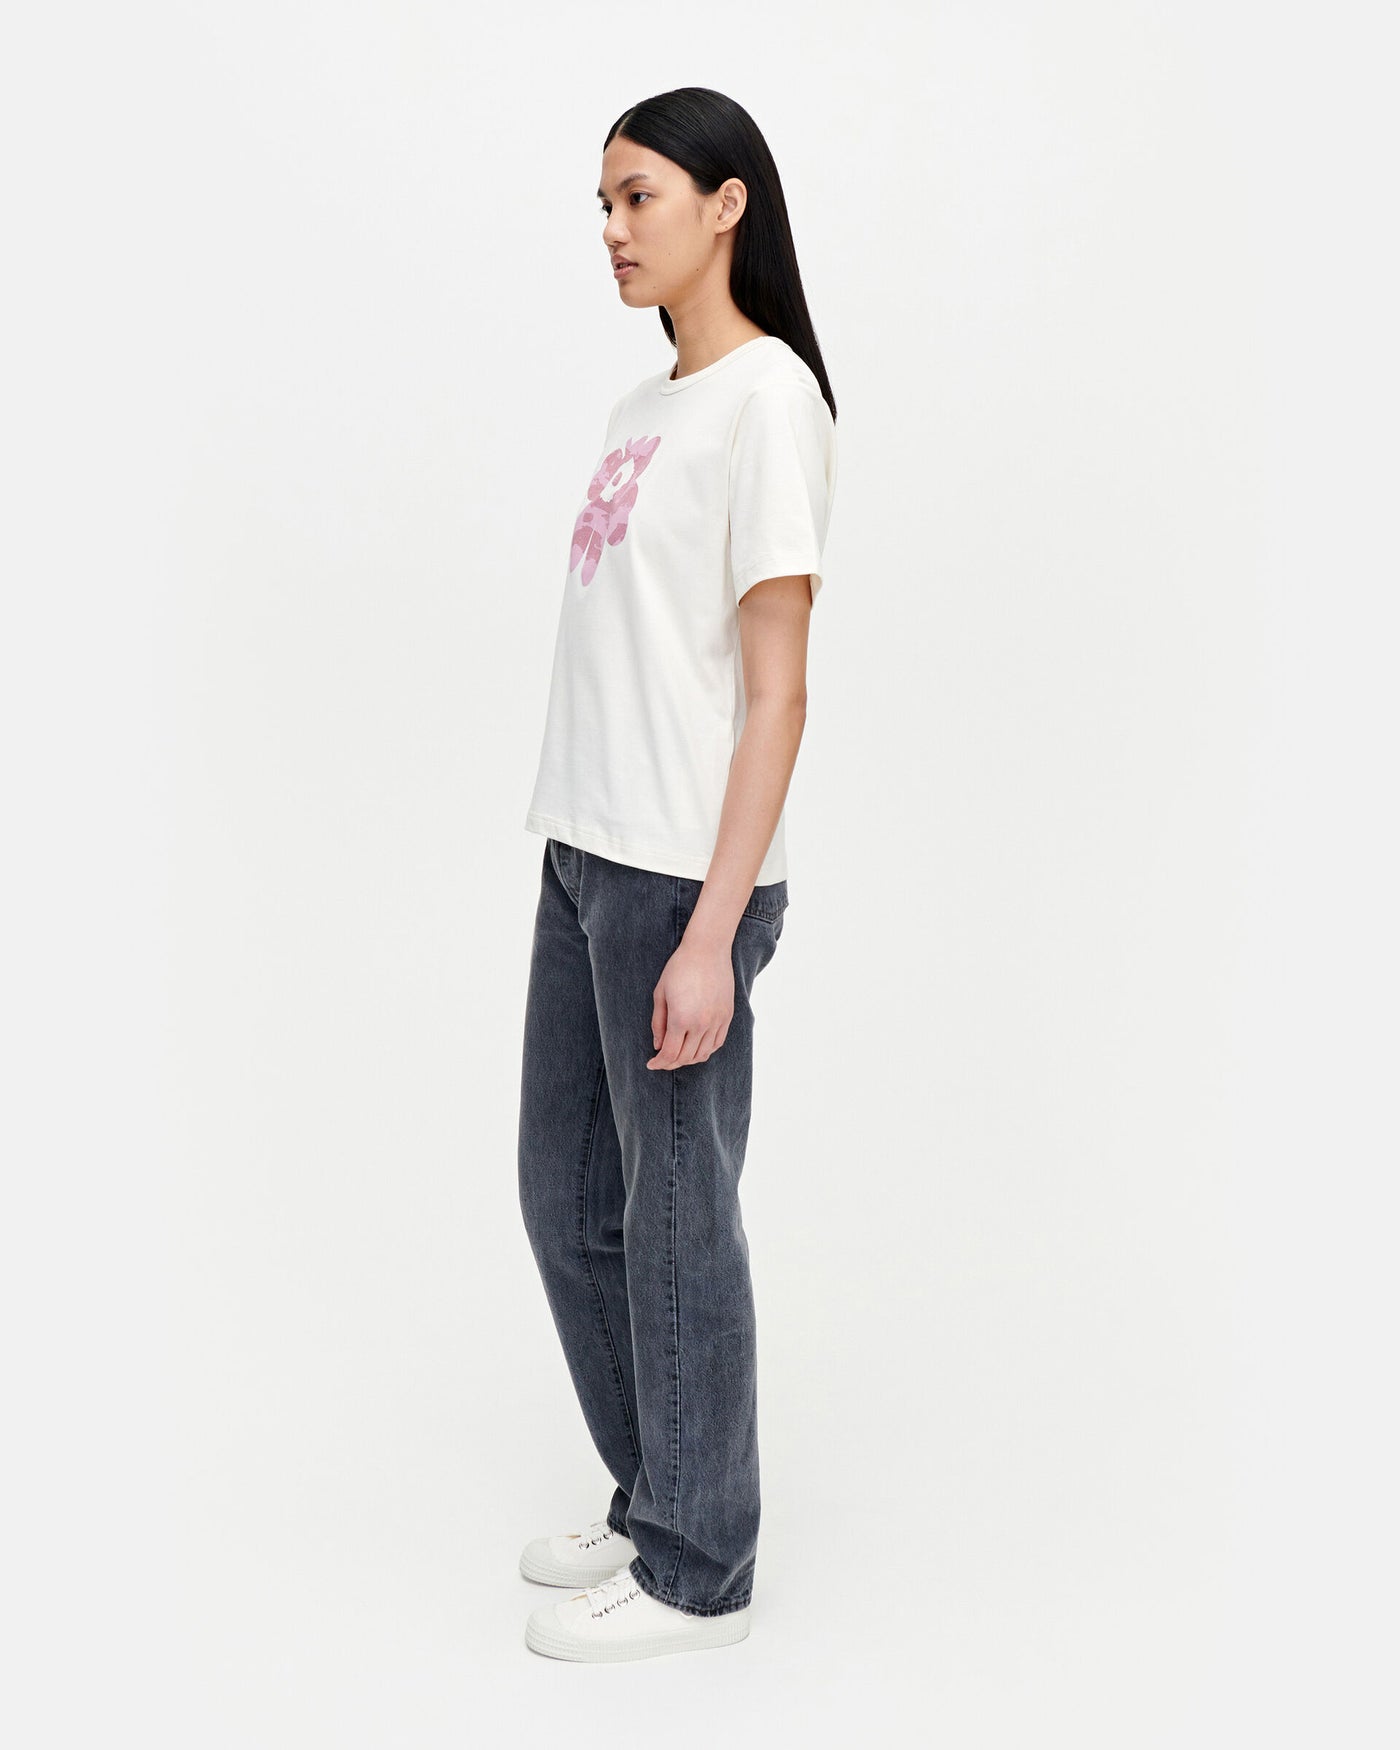 Erna Relaxed Unikko Placement T-Shirt